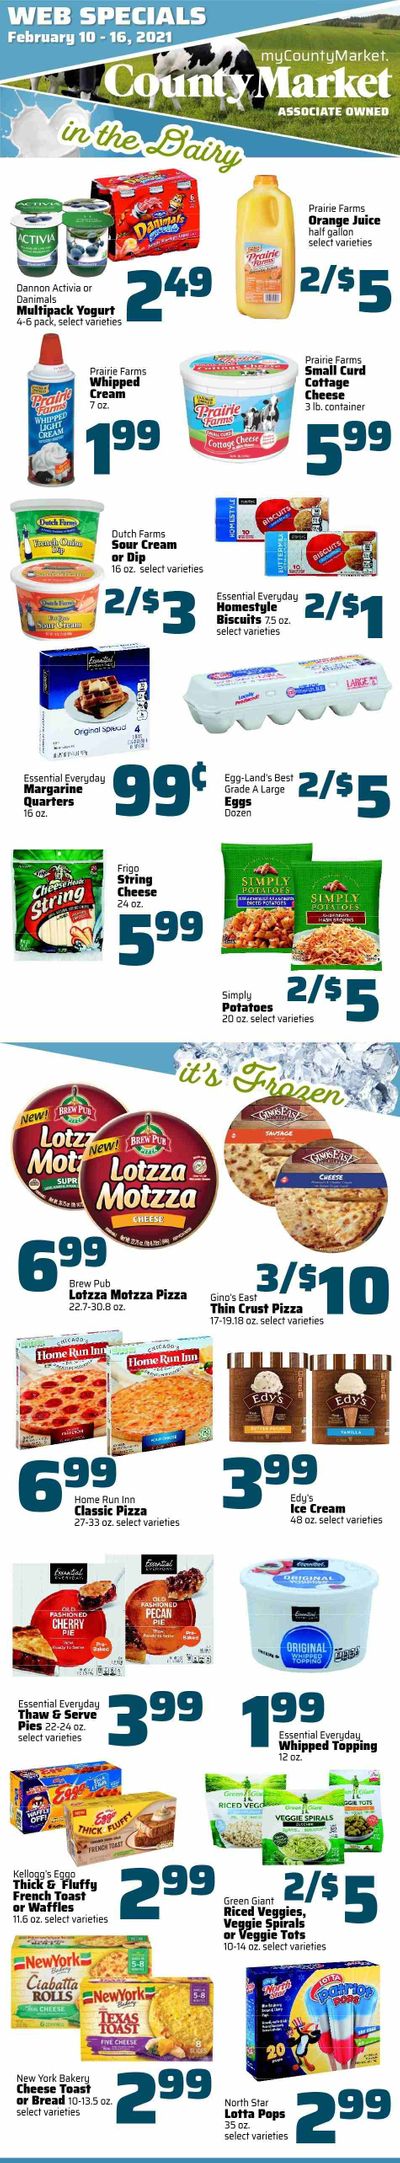 County Market Weekly Ad Flyer February 10 to February 16